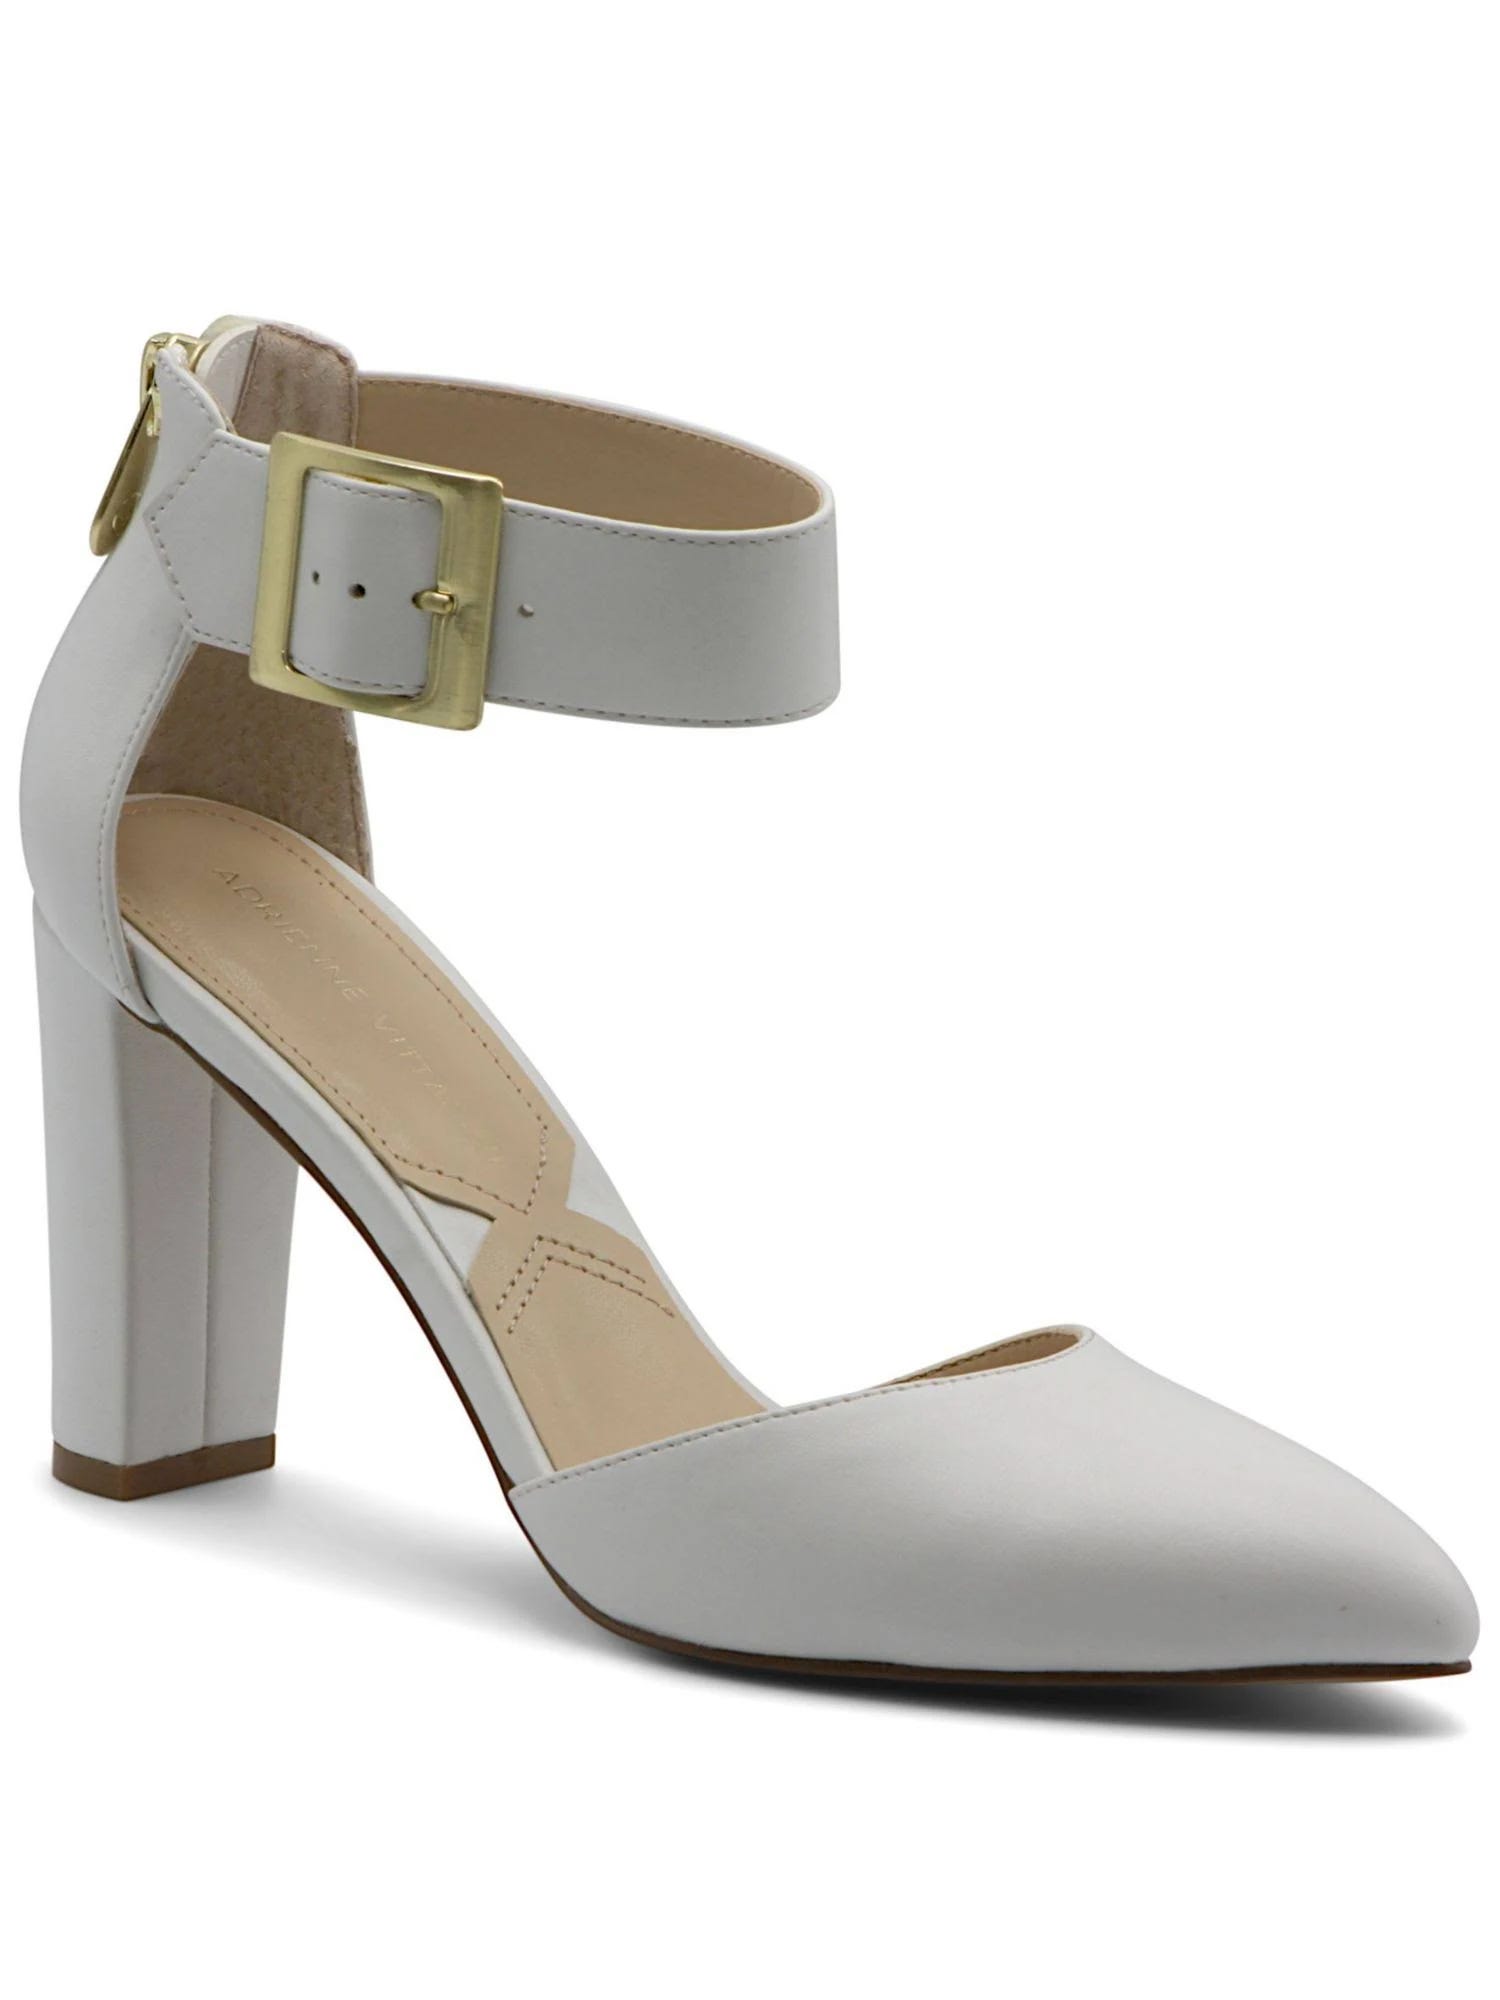 Stylish White Platform Pumps with Adjustable Strap and Pointed Toe | Image